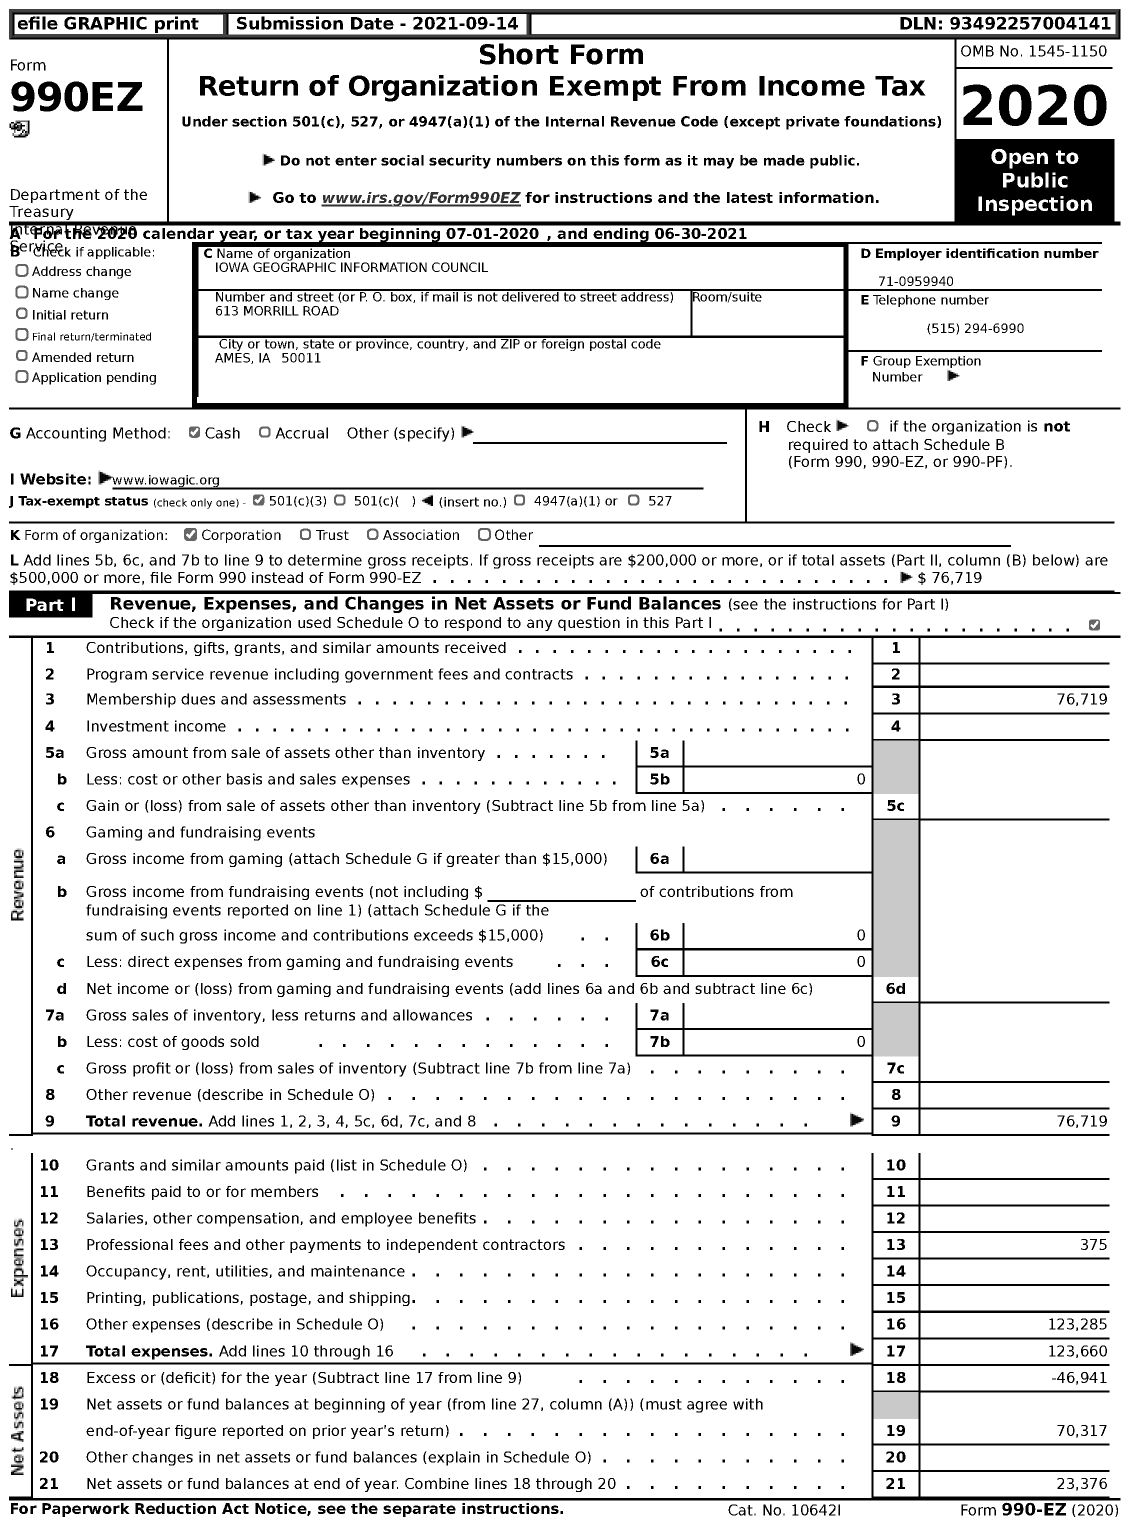 Image of first page of 2020 Form 990EZ for Iowa Geographic Information Council